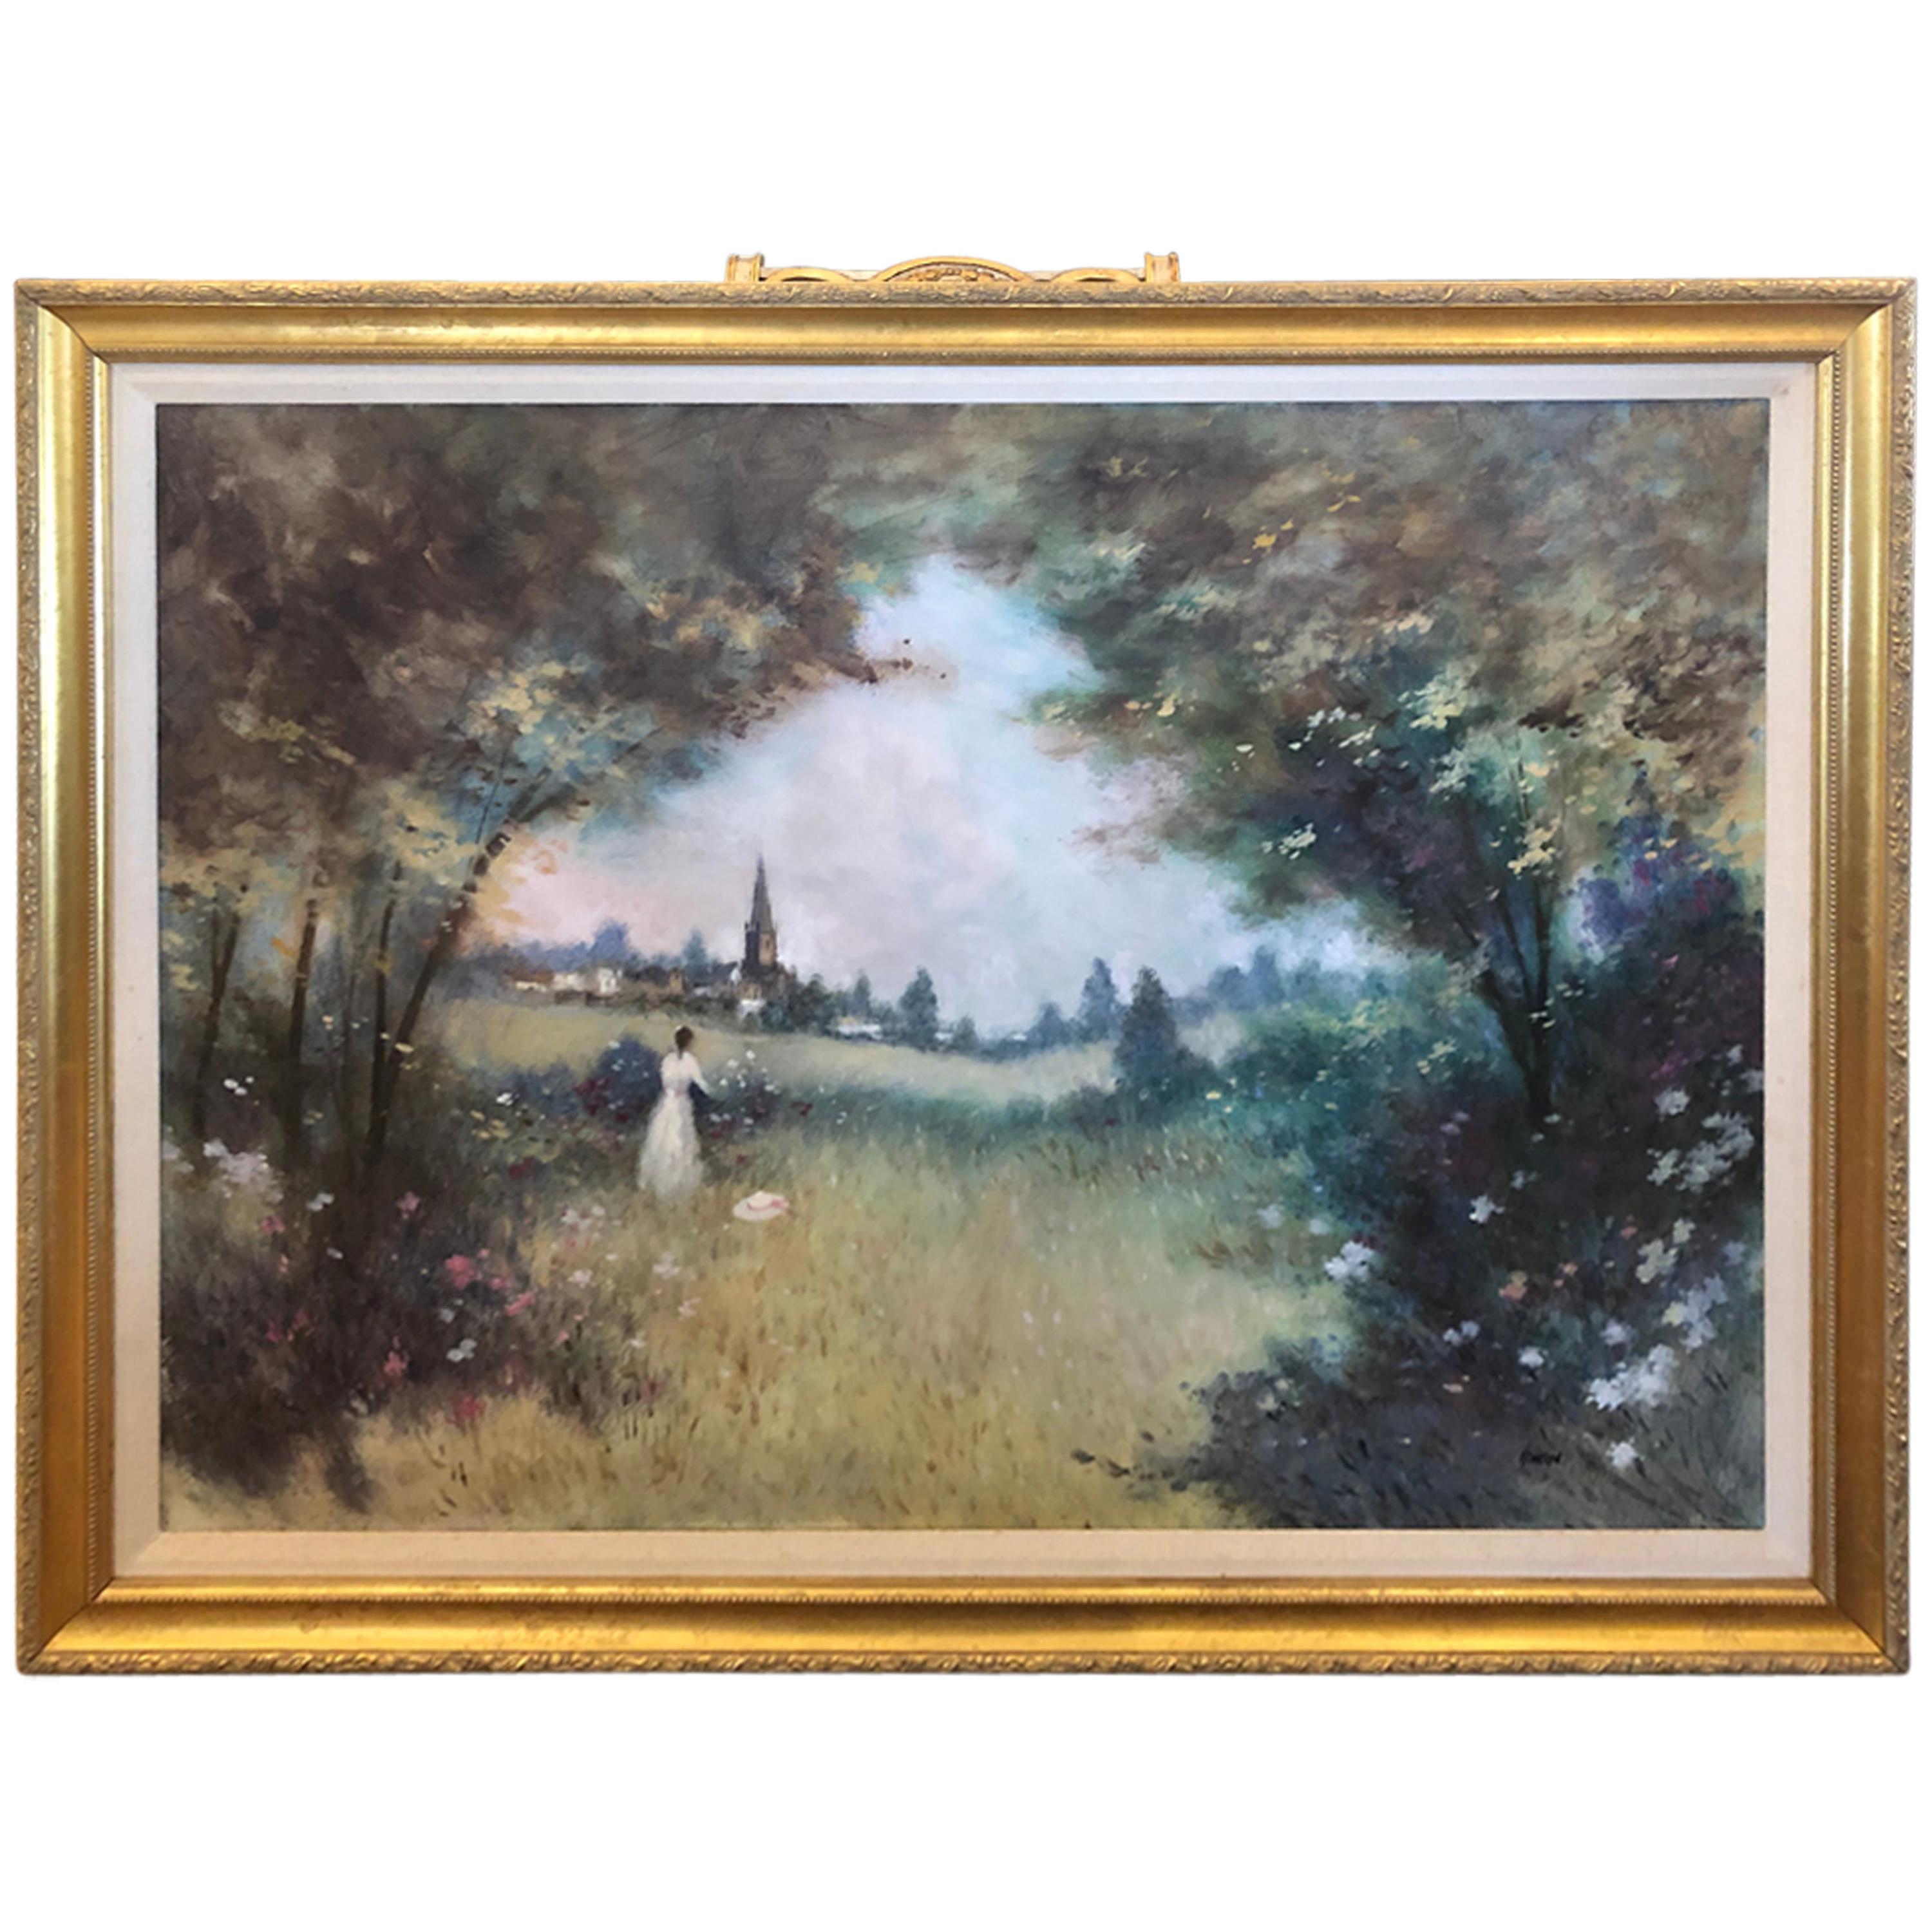 Magical Original Large Landscape of Lady in the Country by Llewelyn